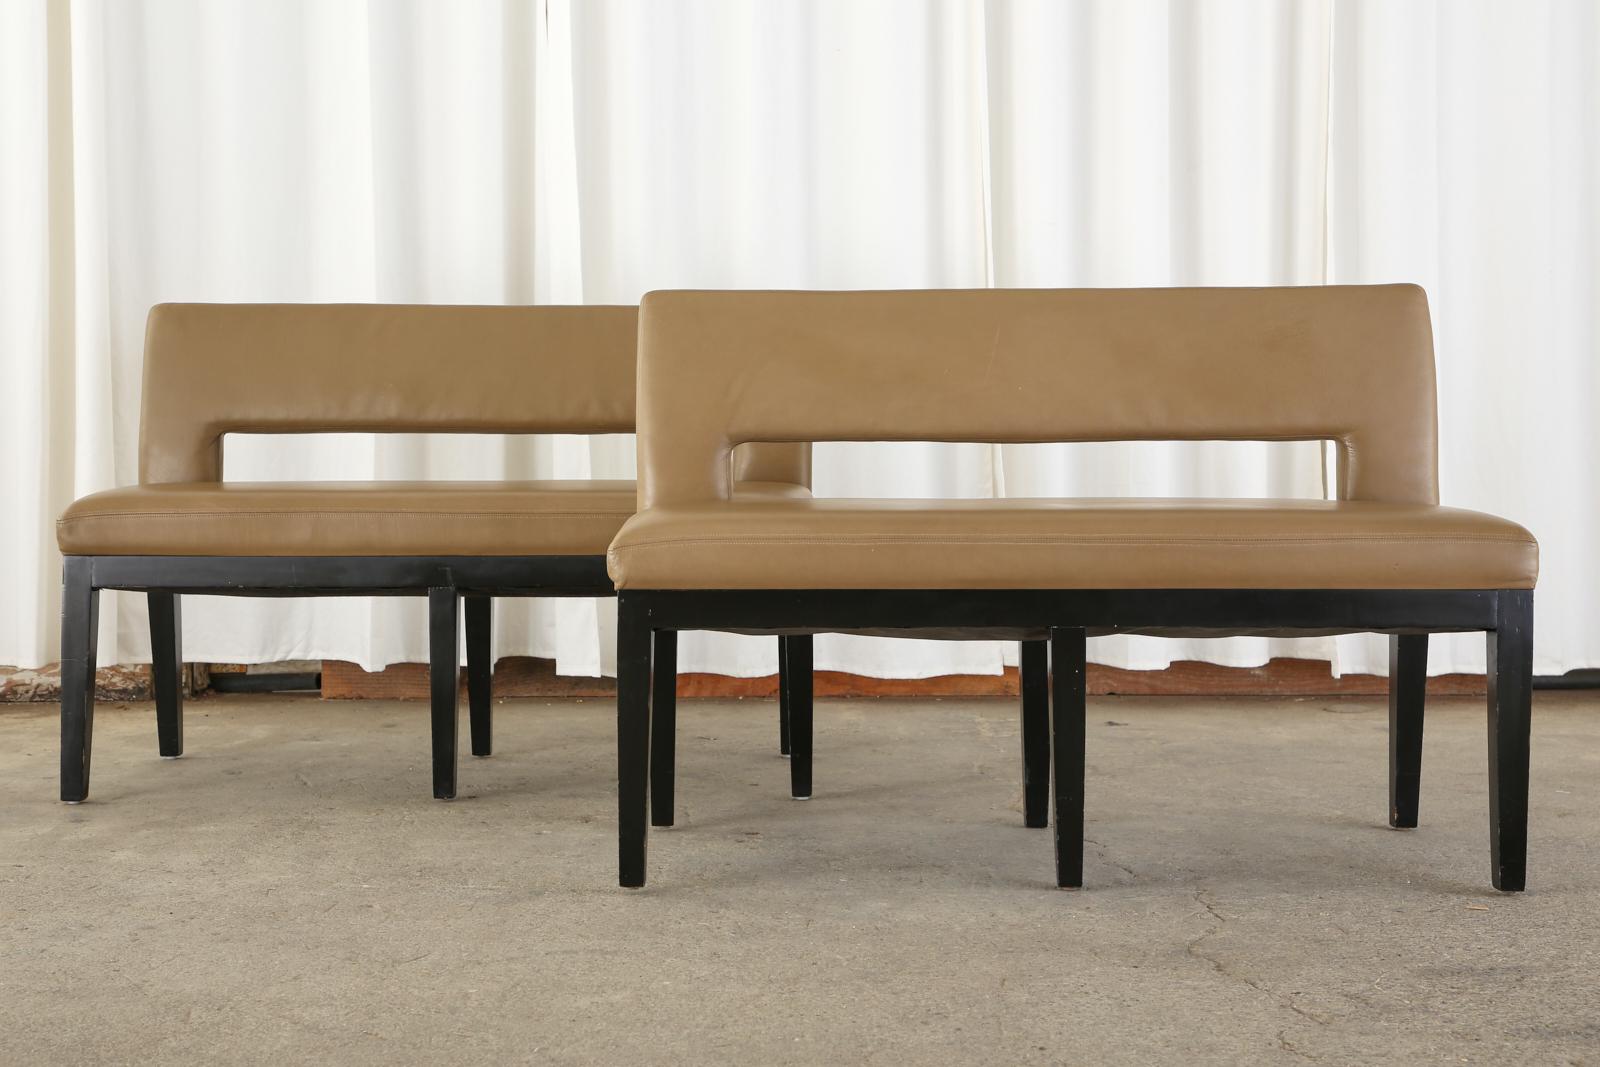 Stylish pair of dining banquette benches or settees designed by Dakota Jackson. The benches feature a hardwood frame with an ebonized lacquer finish. Upholstered with thick leather the frames have a flat black and open design. The seat is supported